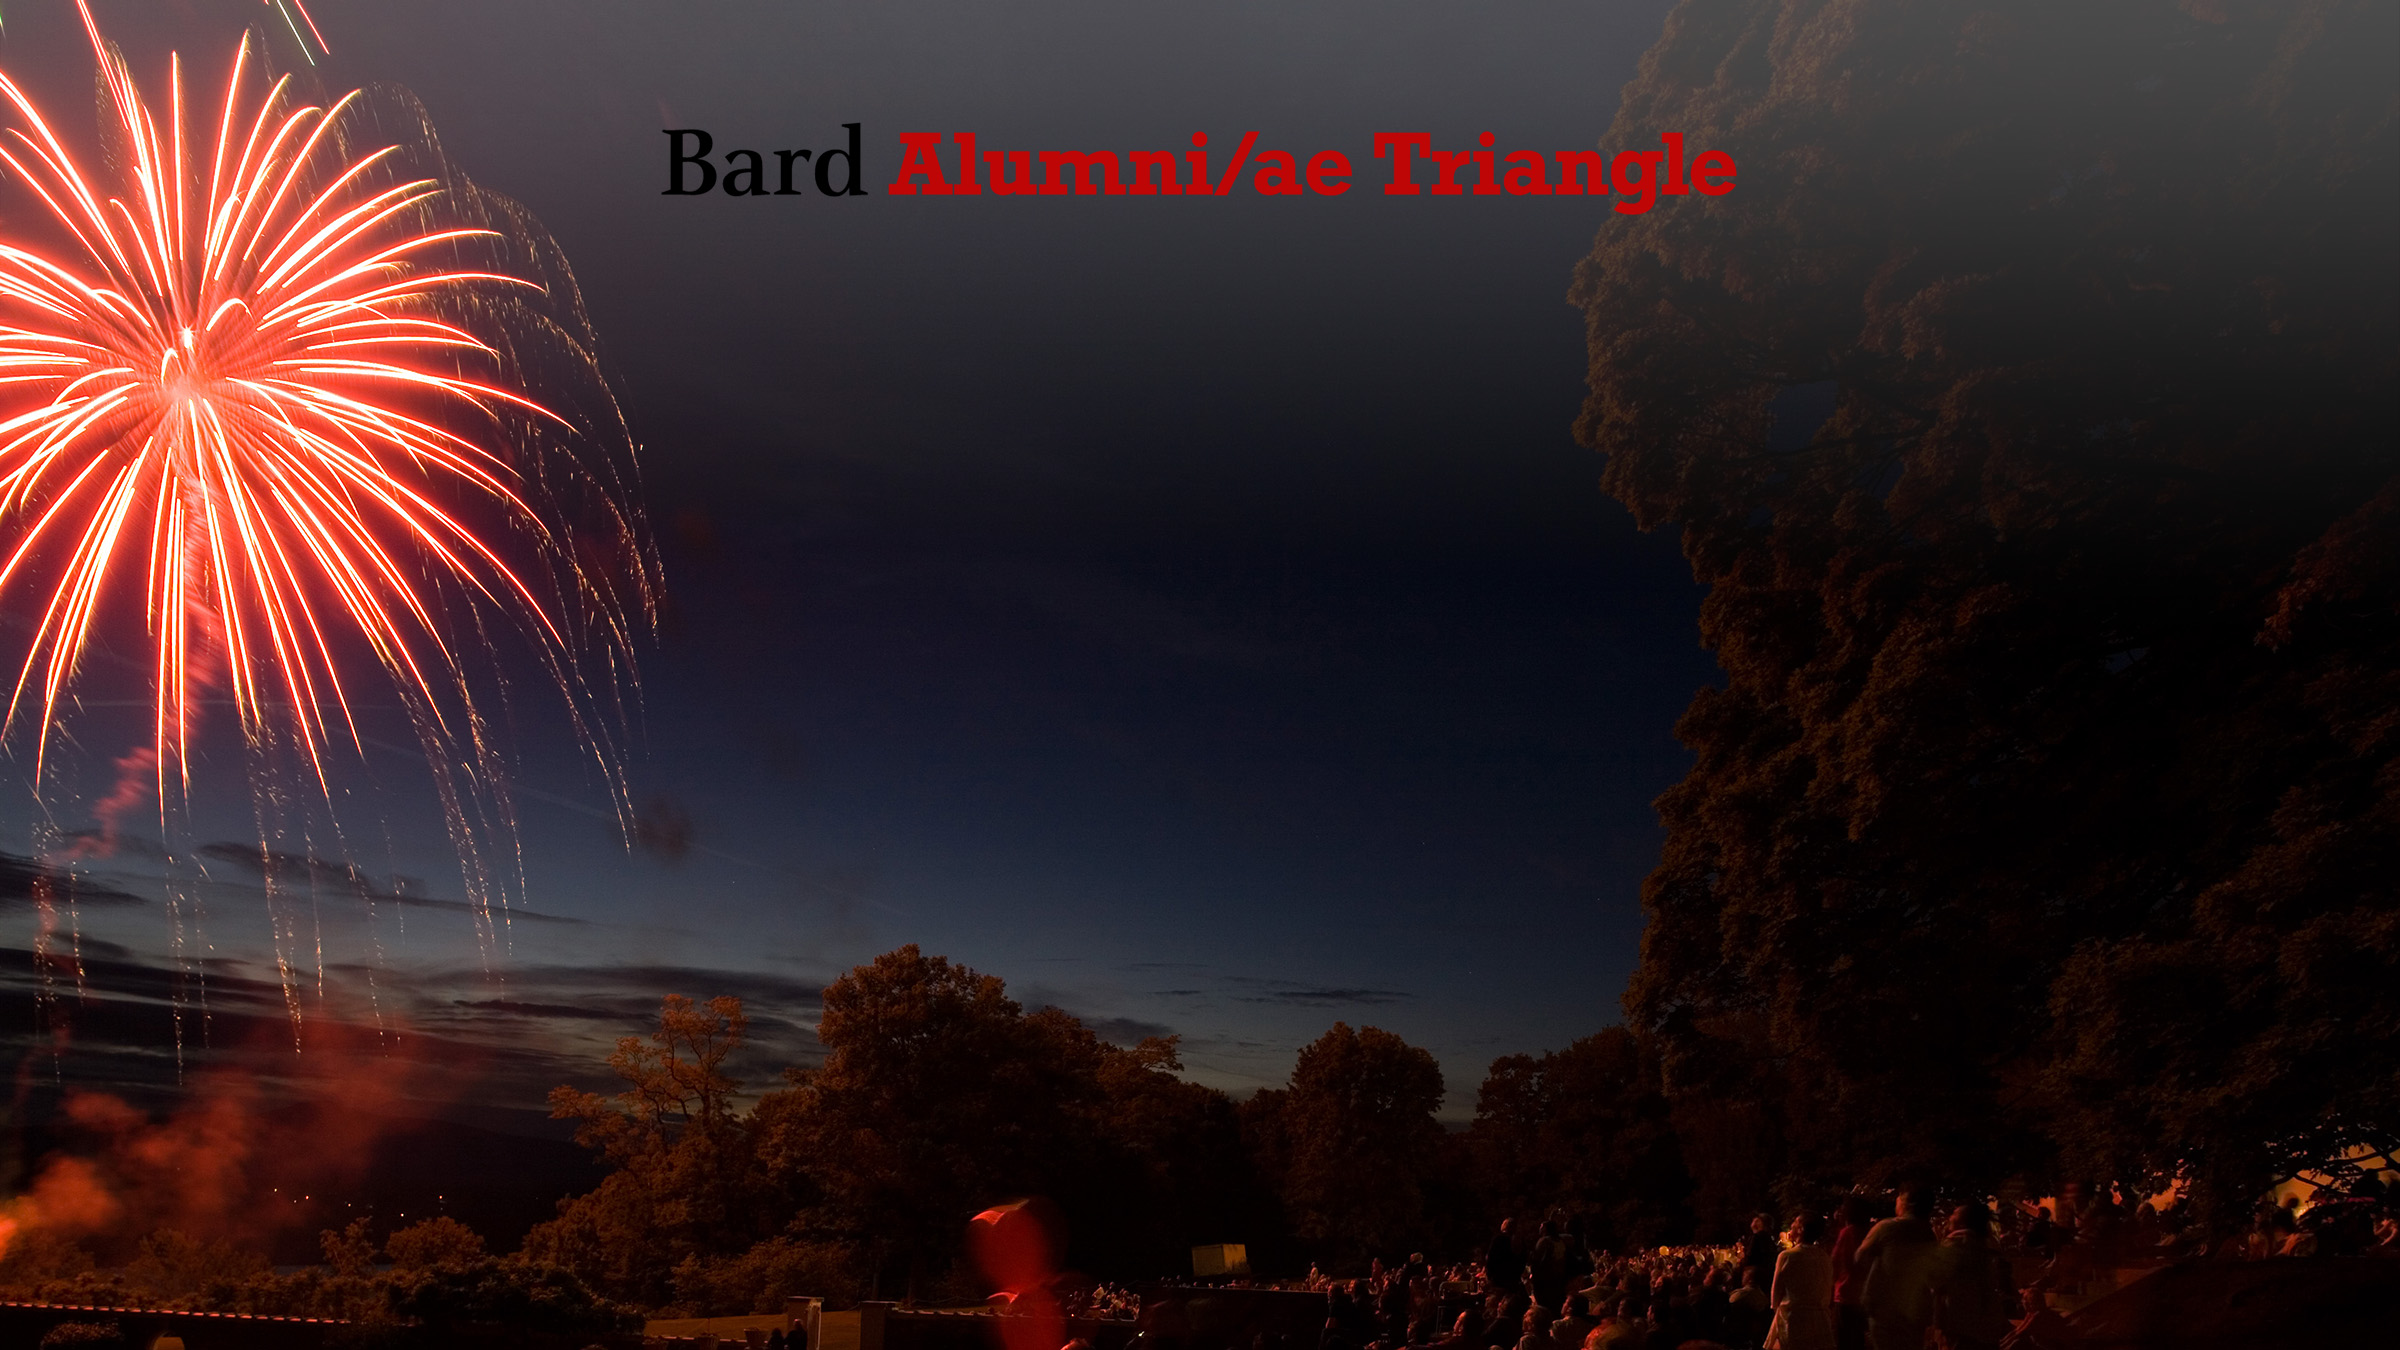 Main Image for The Bard College Alumni/ae Newsletter